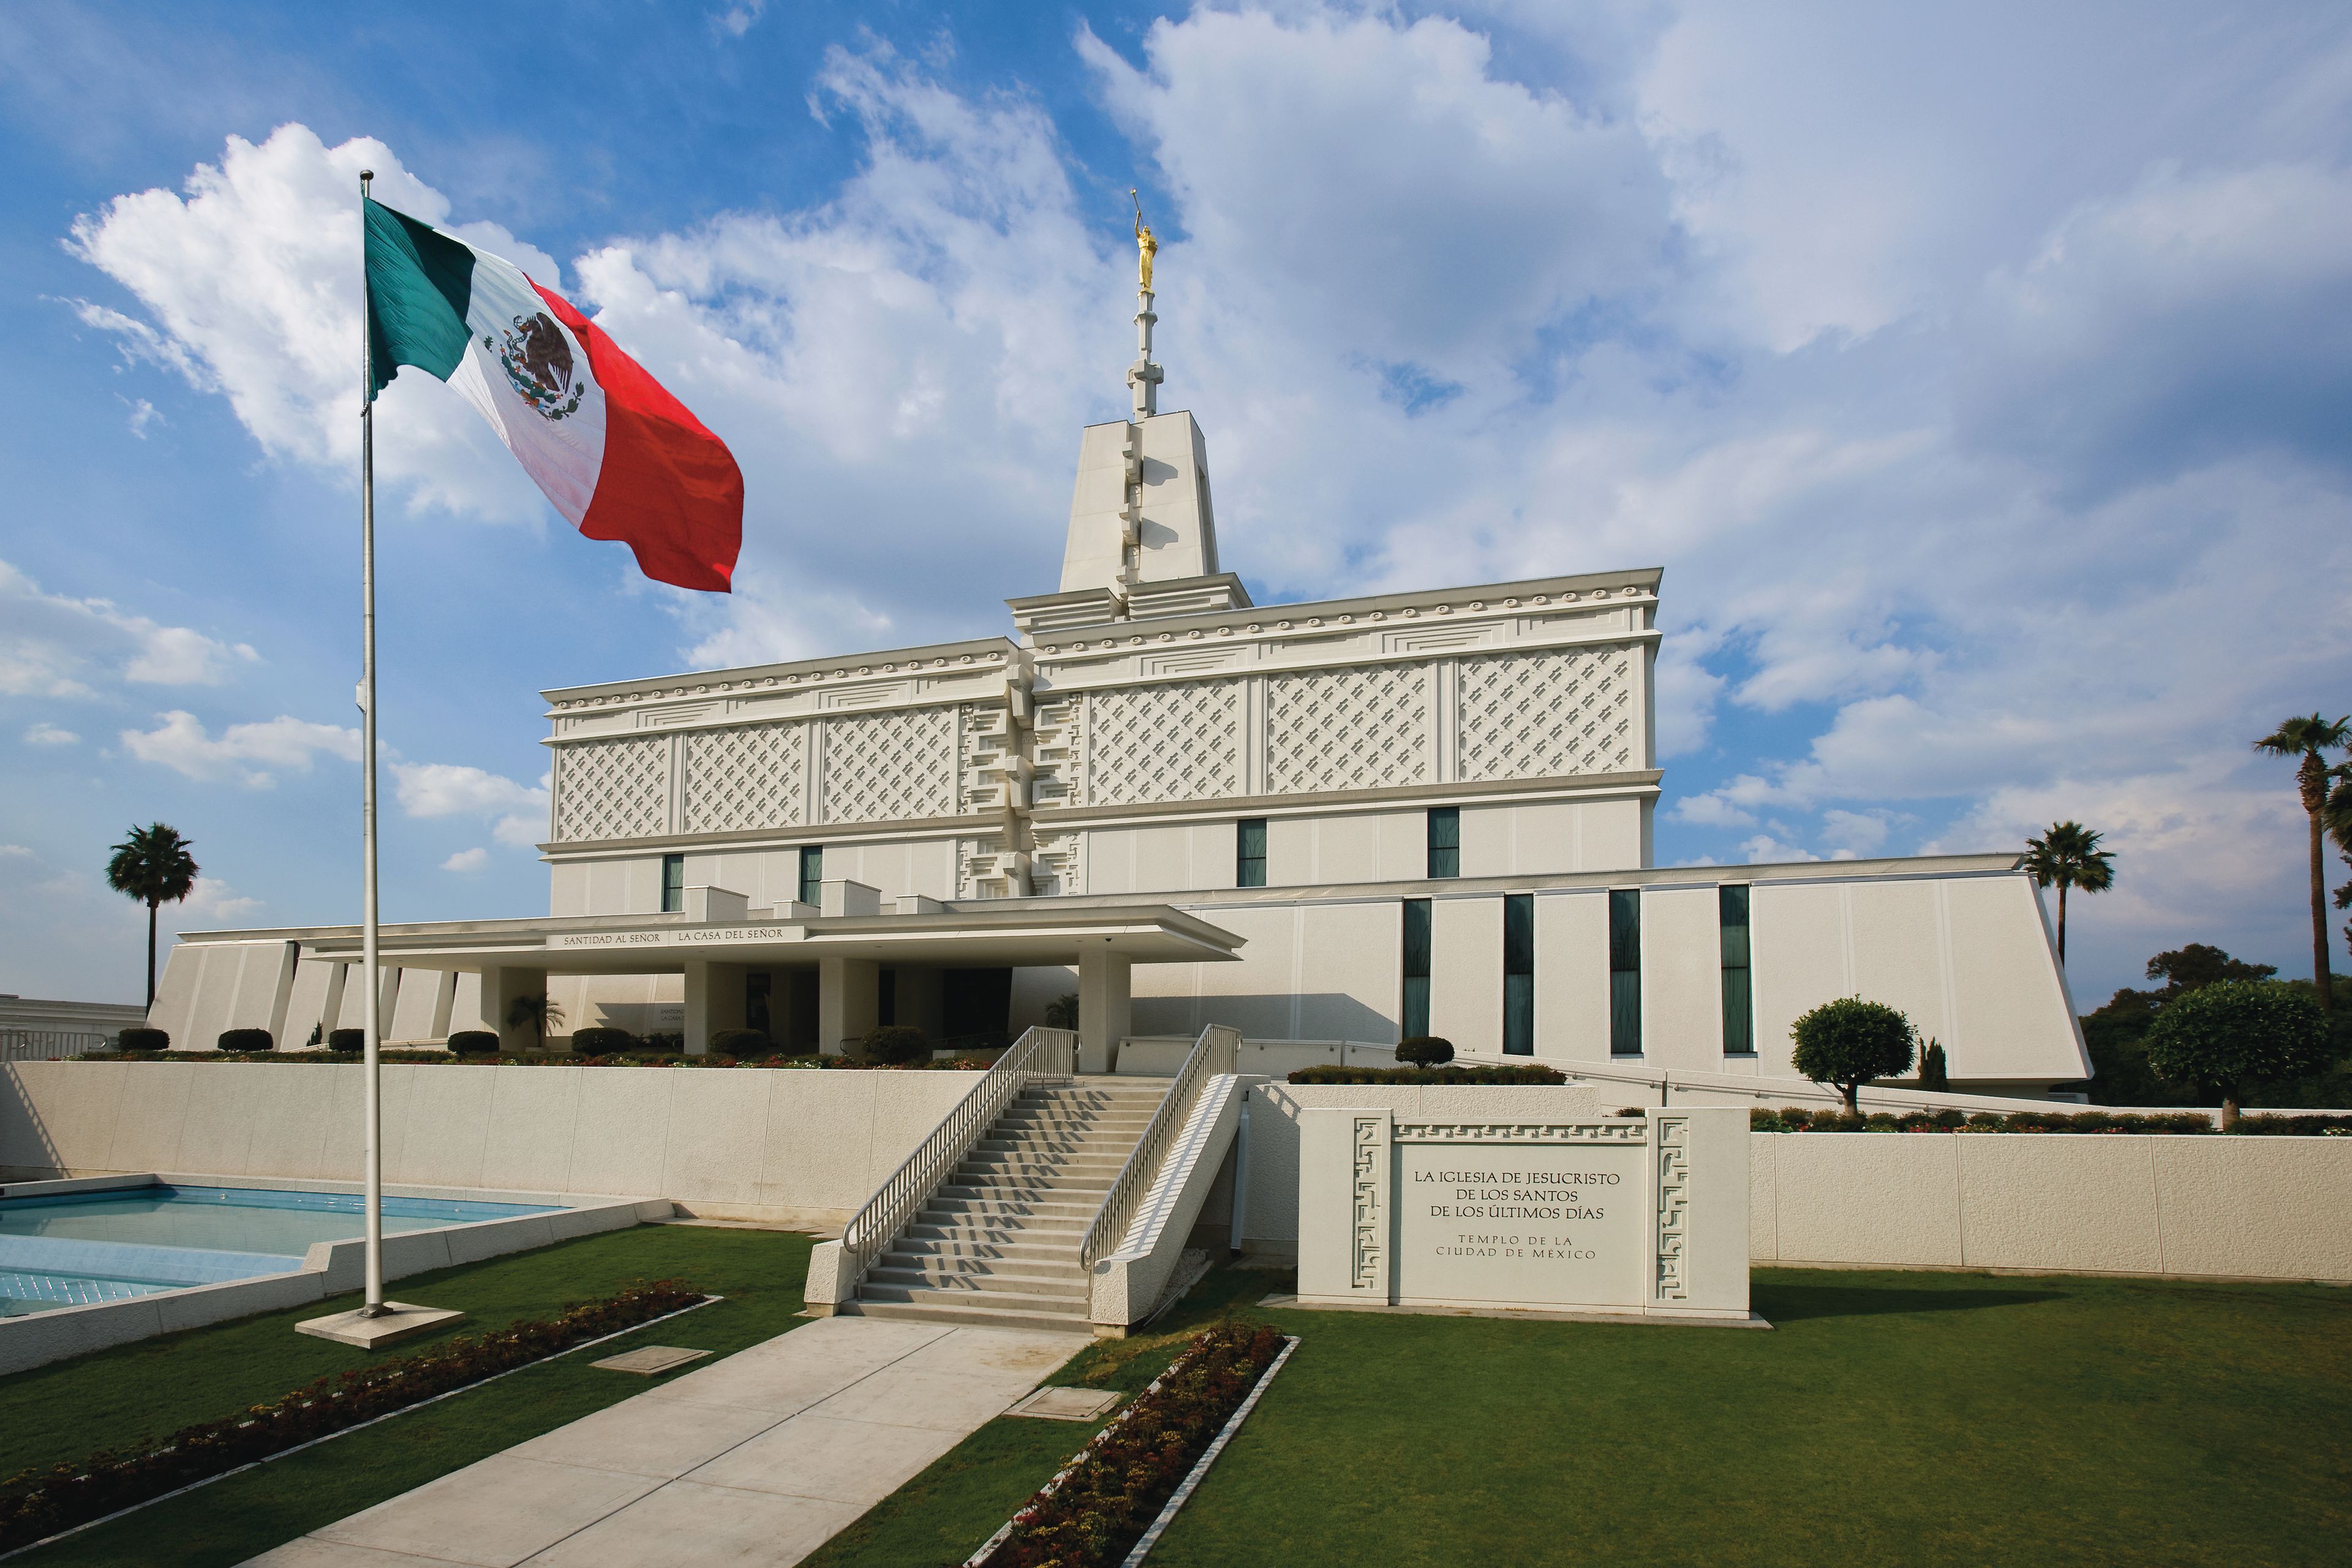 The Mexico City Mexico Temple name sign, including the entrance and flag.